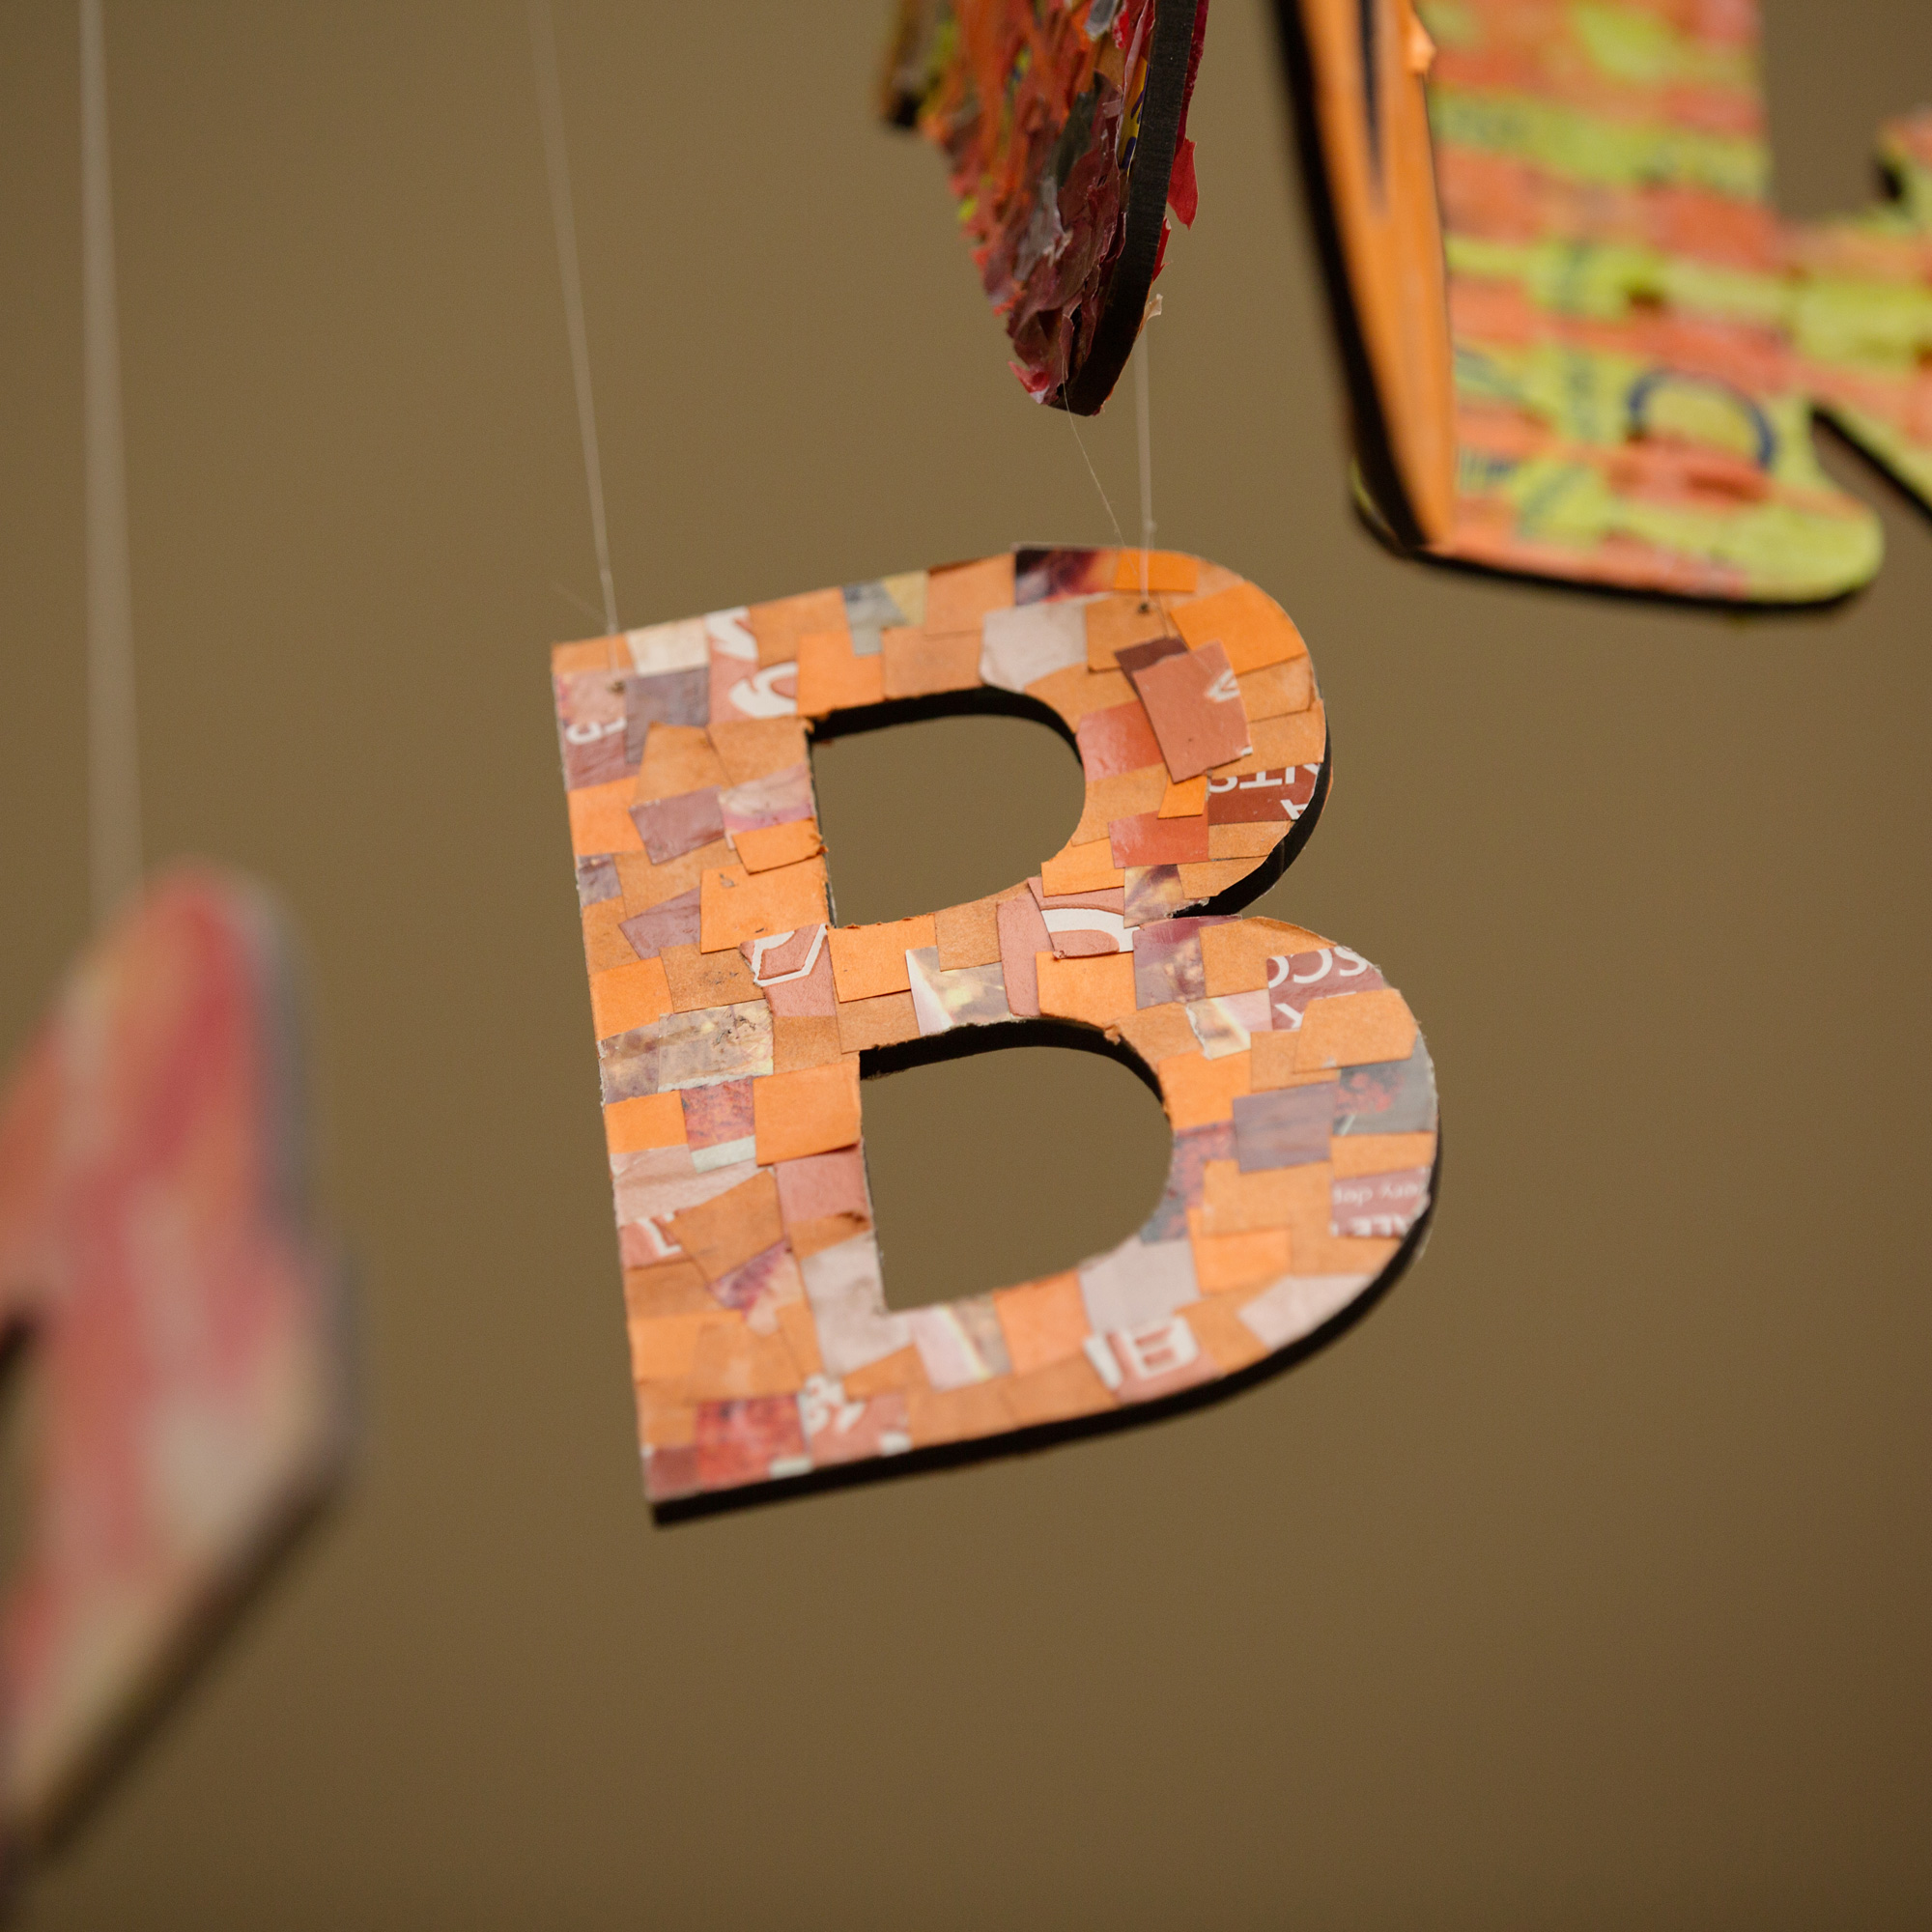 Letter B in art display made from woven plastics